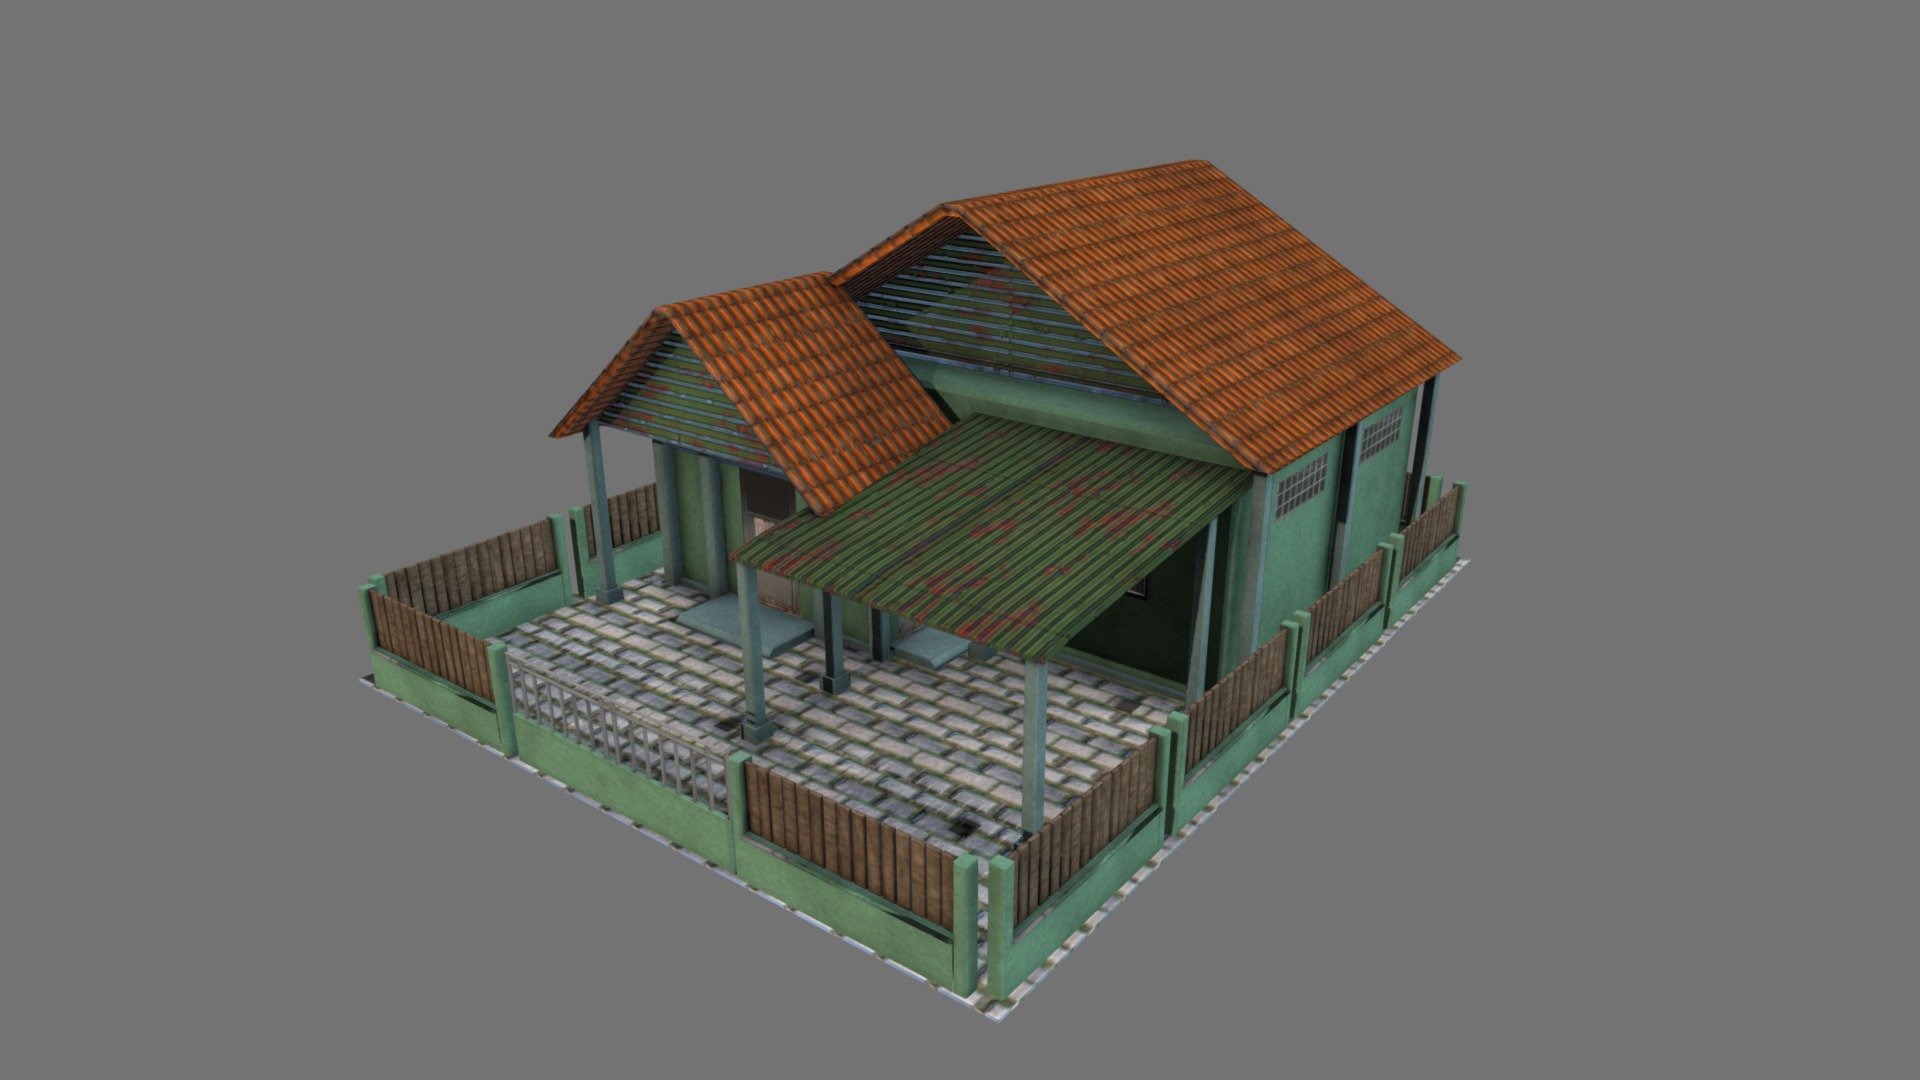 Building 3d model.

Poly: 2,311
Vertex: 3,724
in subdivision level 0

2048x2048 PNG Texture
Include Diffuse, Roughness and Normal

3ds max,FBX,OBJ and texture files in additional file 3d model